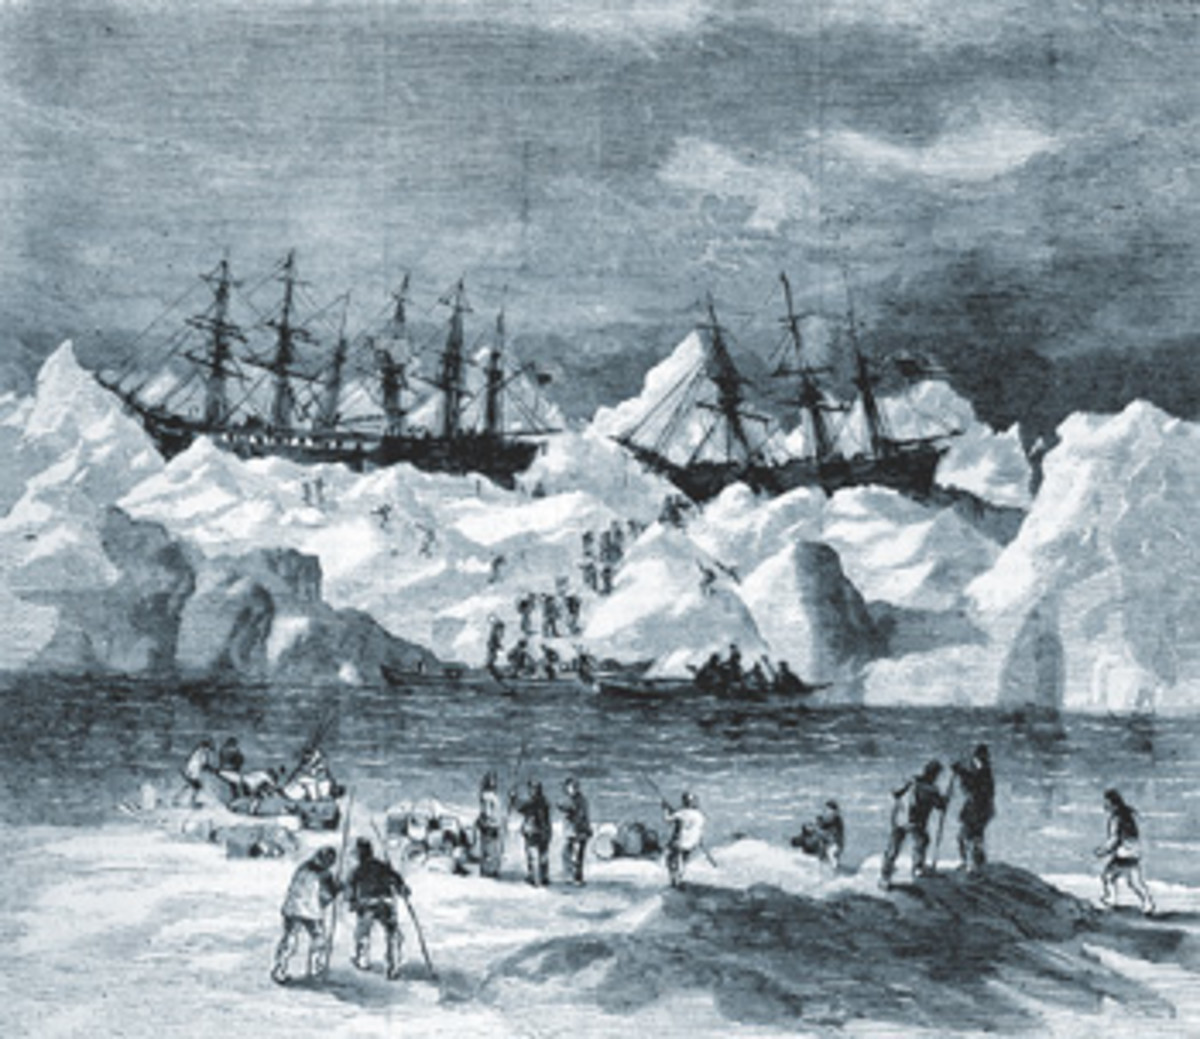 No lives were lost when the 33 whalers, trapped in Arctic ice, were abandoned in 1871.